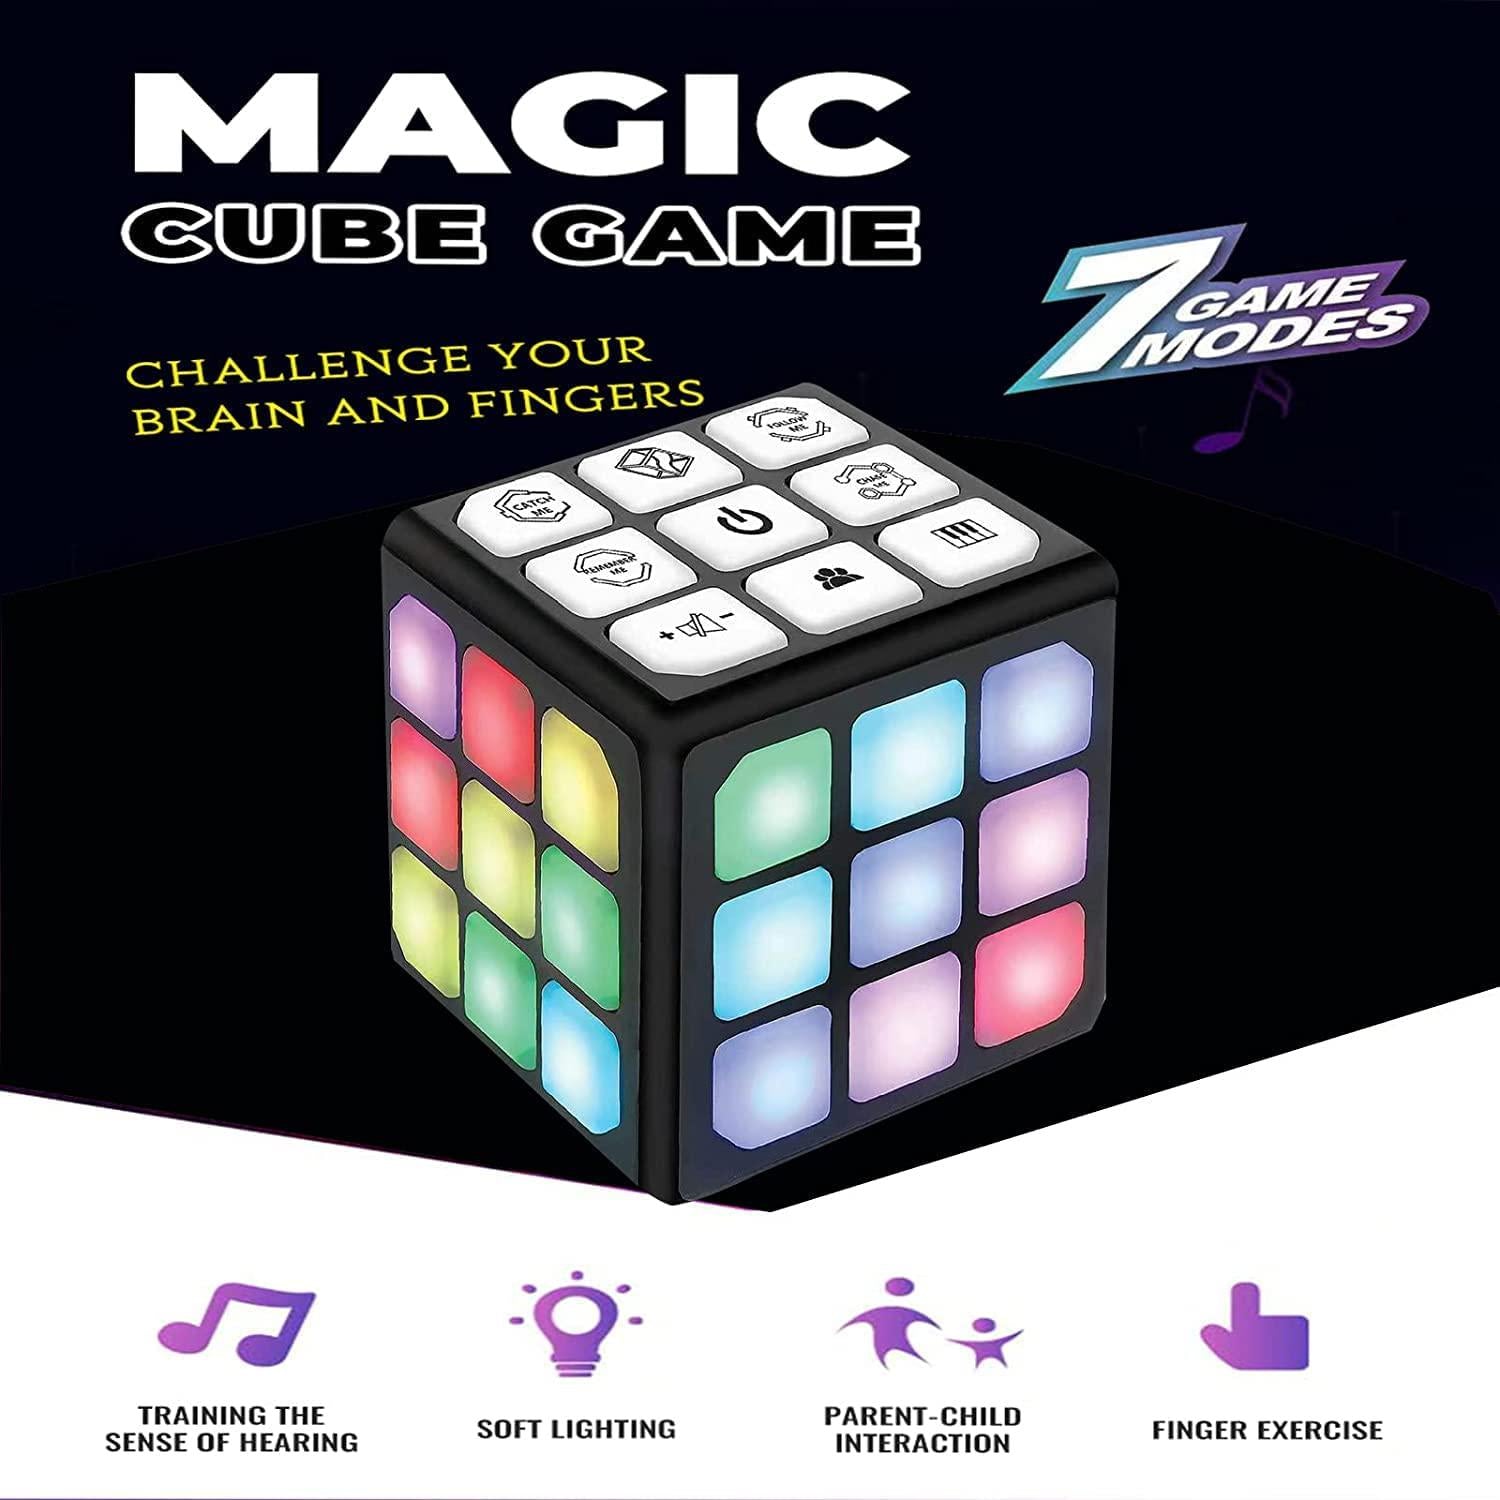 Generik, Magic Cube Game | Flashing Cube Electronic Memory and Brain Game | 7-in-1 Handheld Game for Kids | STEM Toy for Kids Boys and Girls | Fun Gift Toy for Kids Ages 6 7 8 9 10 11 12 Years Old